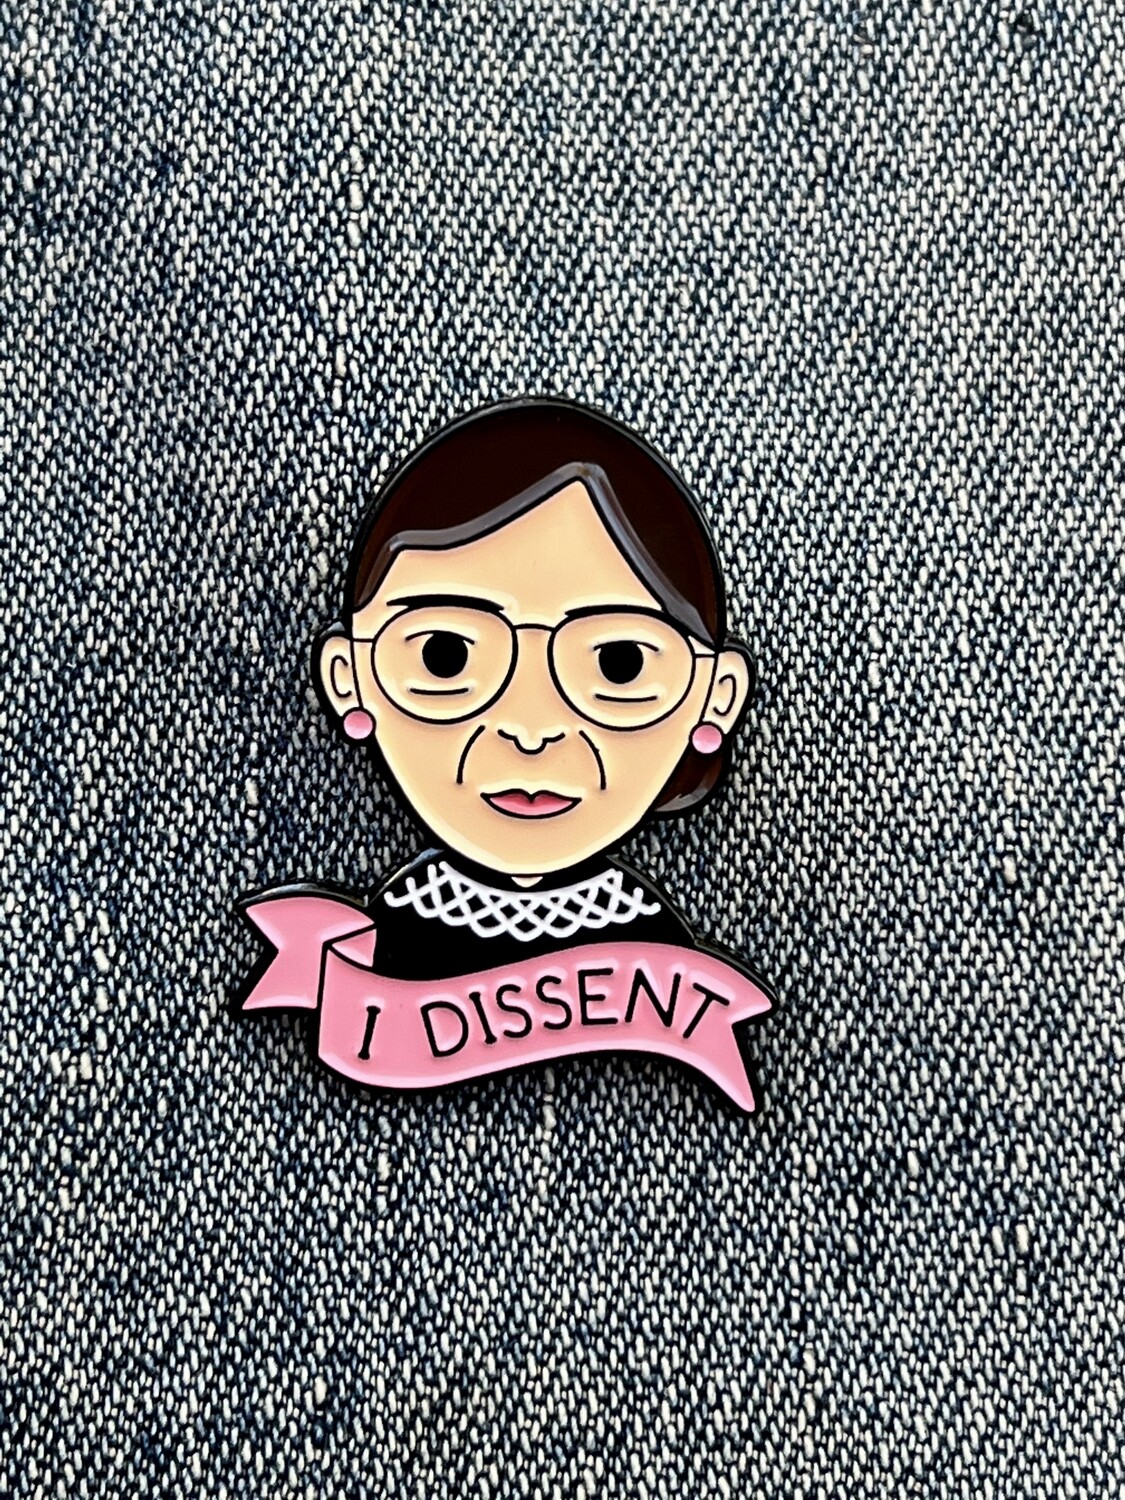 Justice Ruth Bader Ginsburg soft enamel pin, I Dissent, women's reproductive rights icon, lapel pin